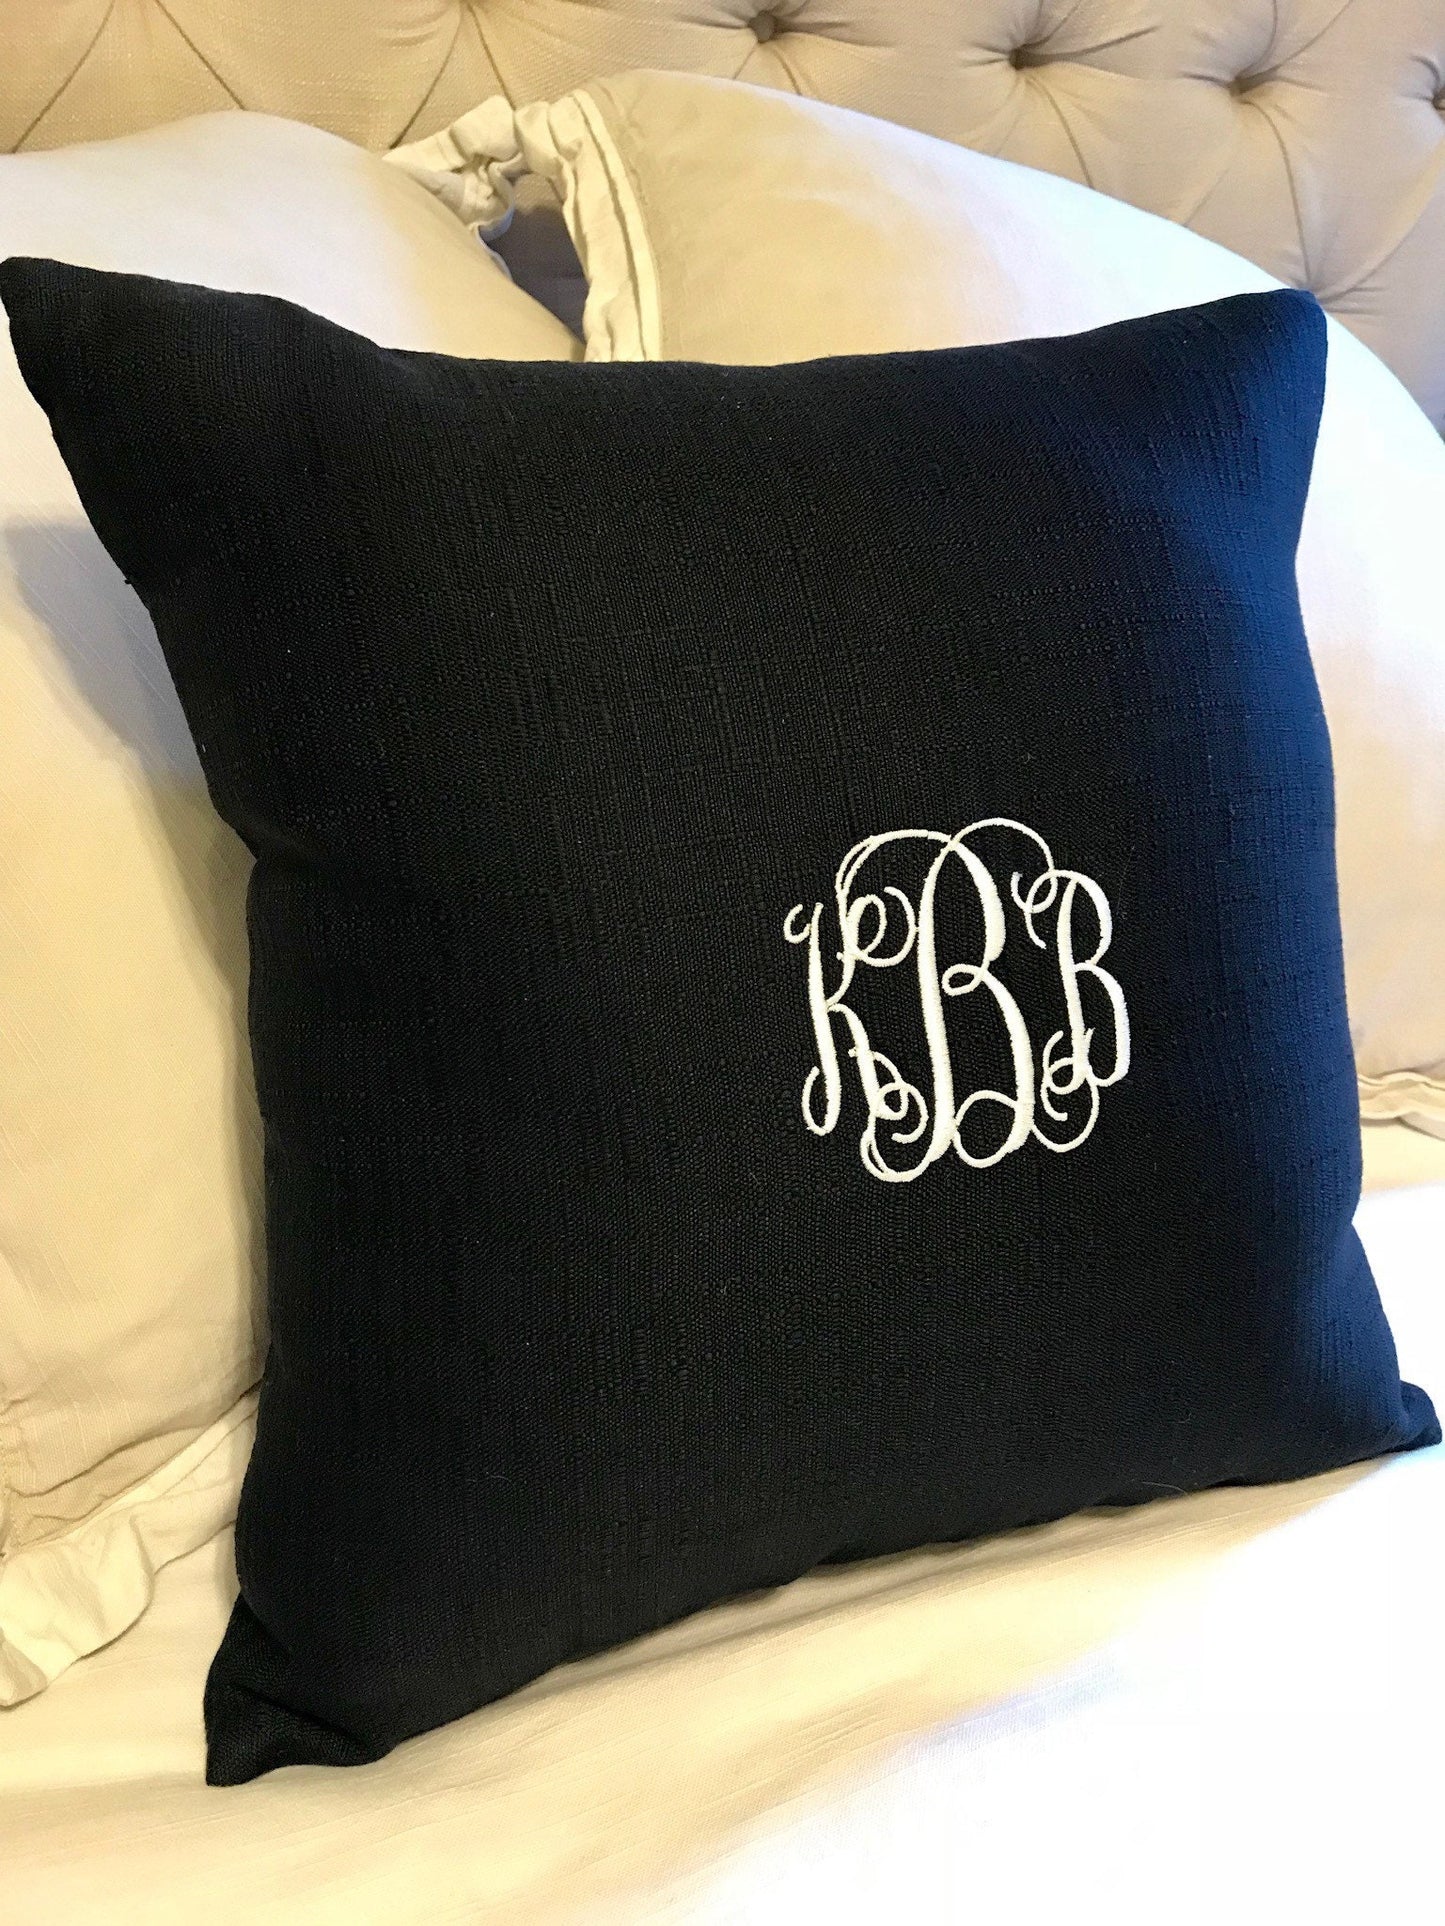 Personalized Pillow Cover/Sham - Customized - embroidered design - Personalized Gift Idea - Sham